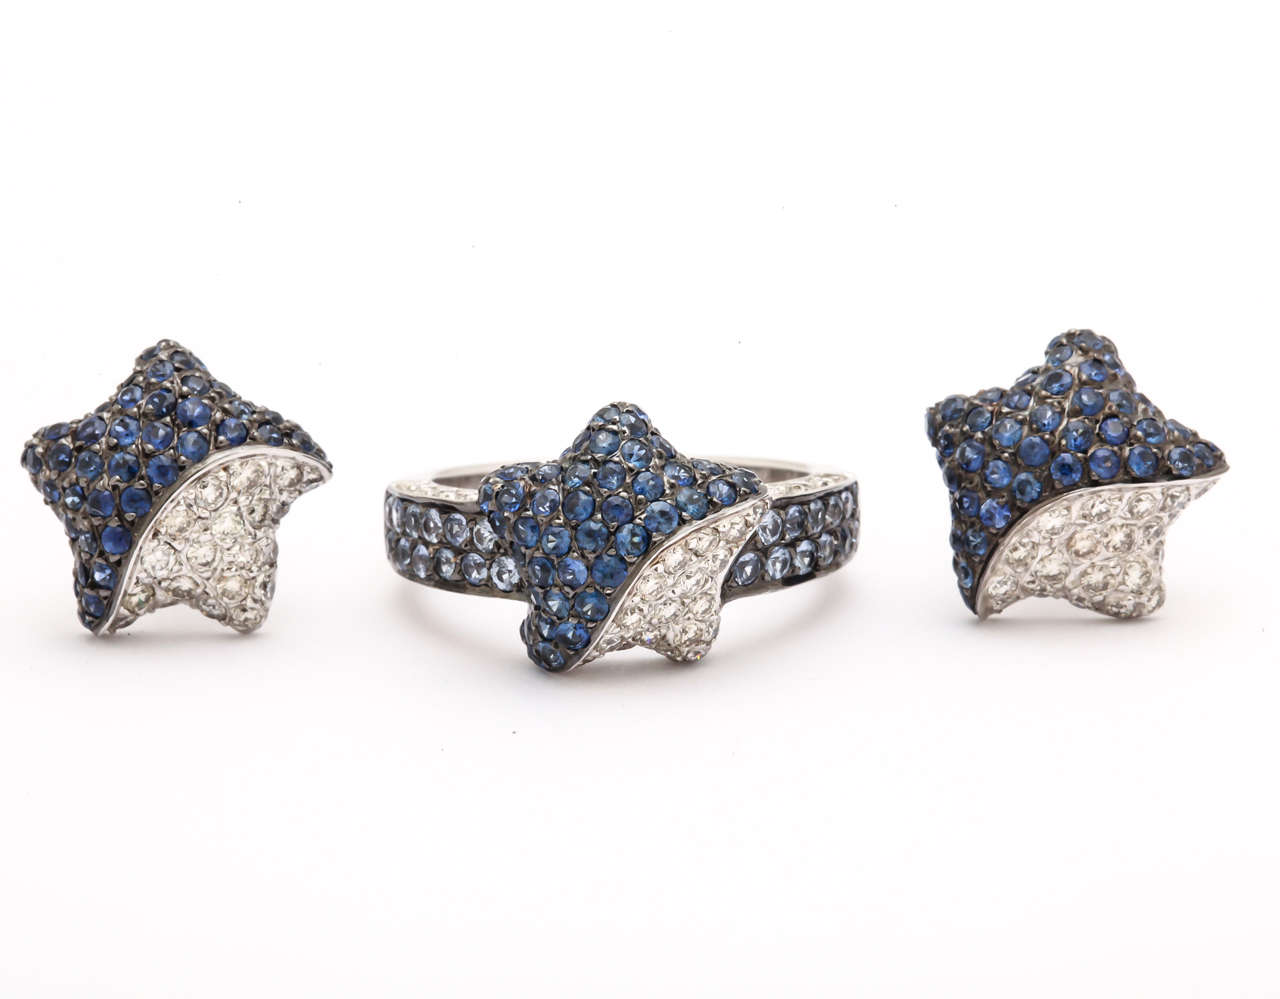 For the Star in your life. The ring is pave set in 18kt white gold with .55 ct white diamonds and 1.2 ct midnight blue sapphires. The sapphires and diamonds go down along the shank of the ring for increased elegance.

The star earrings are set